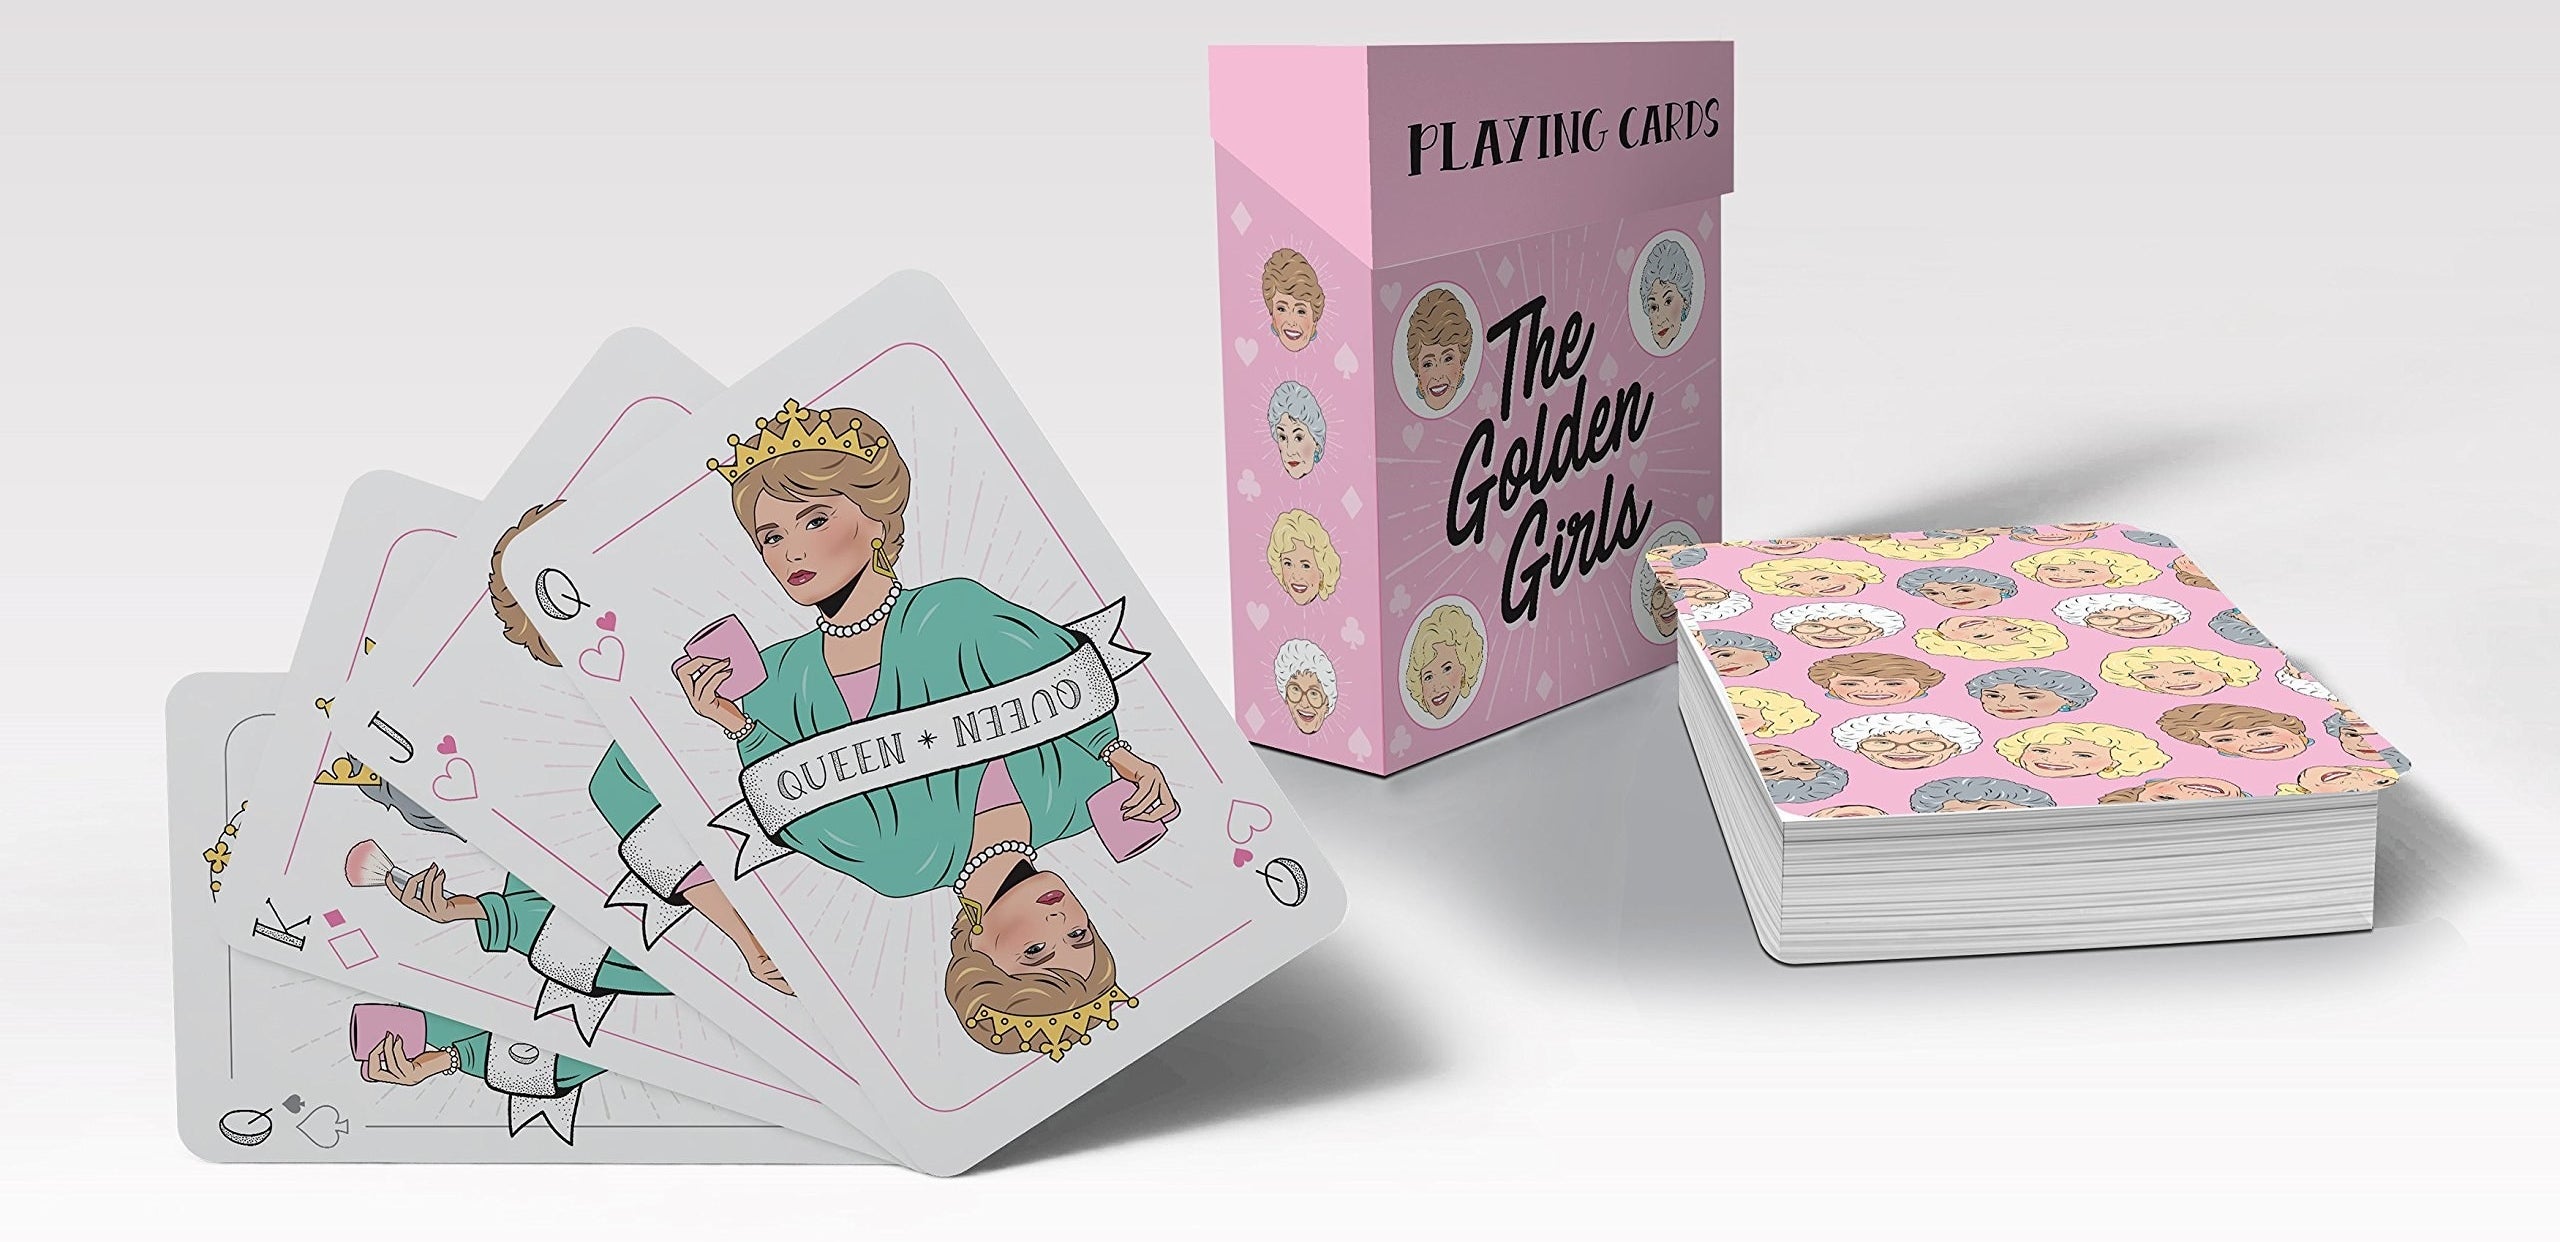 A deck of cards with the cast of Golden Girls on them